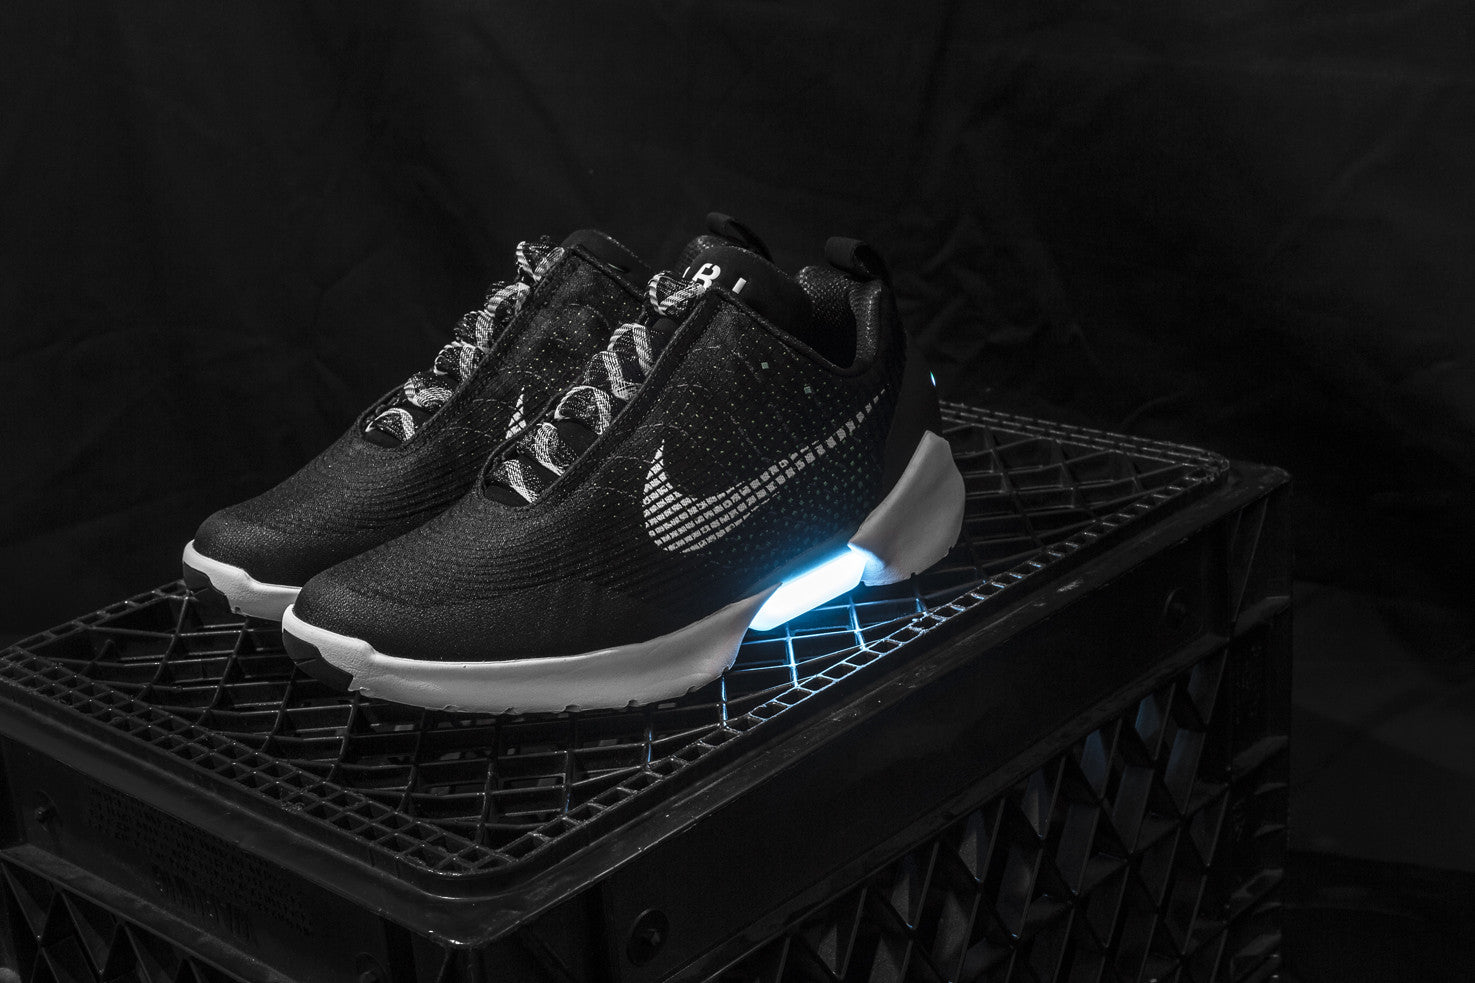 NIKE HYPERADAPT 1.0 / POWERED BY E.A.R.L. TECHNOLOGY – BLENDS